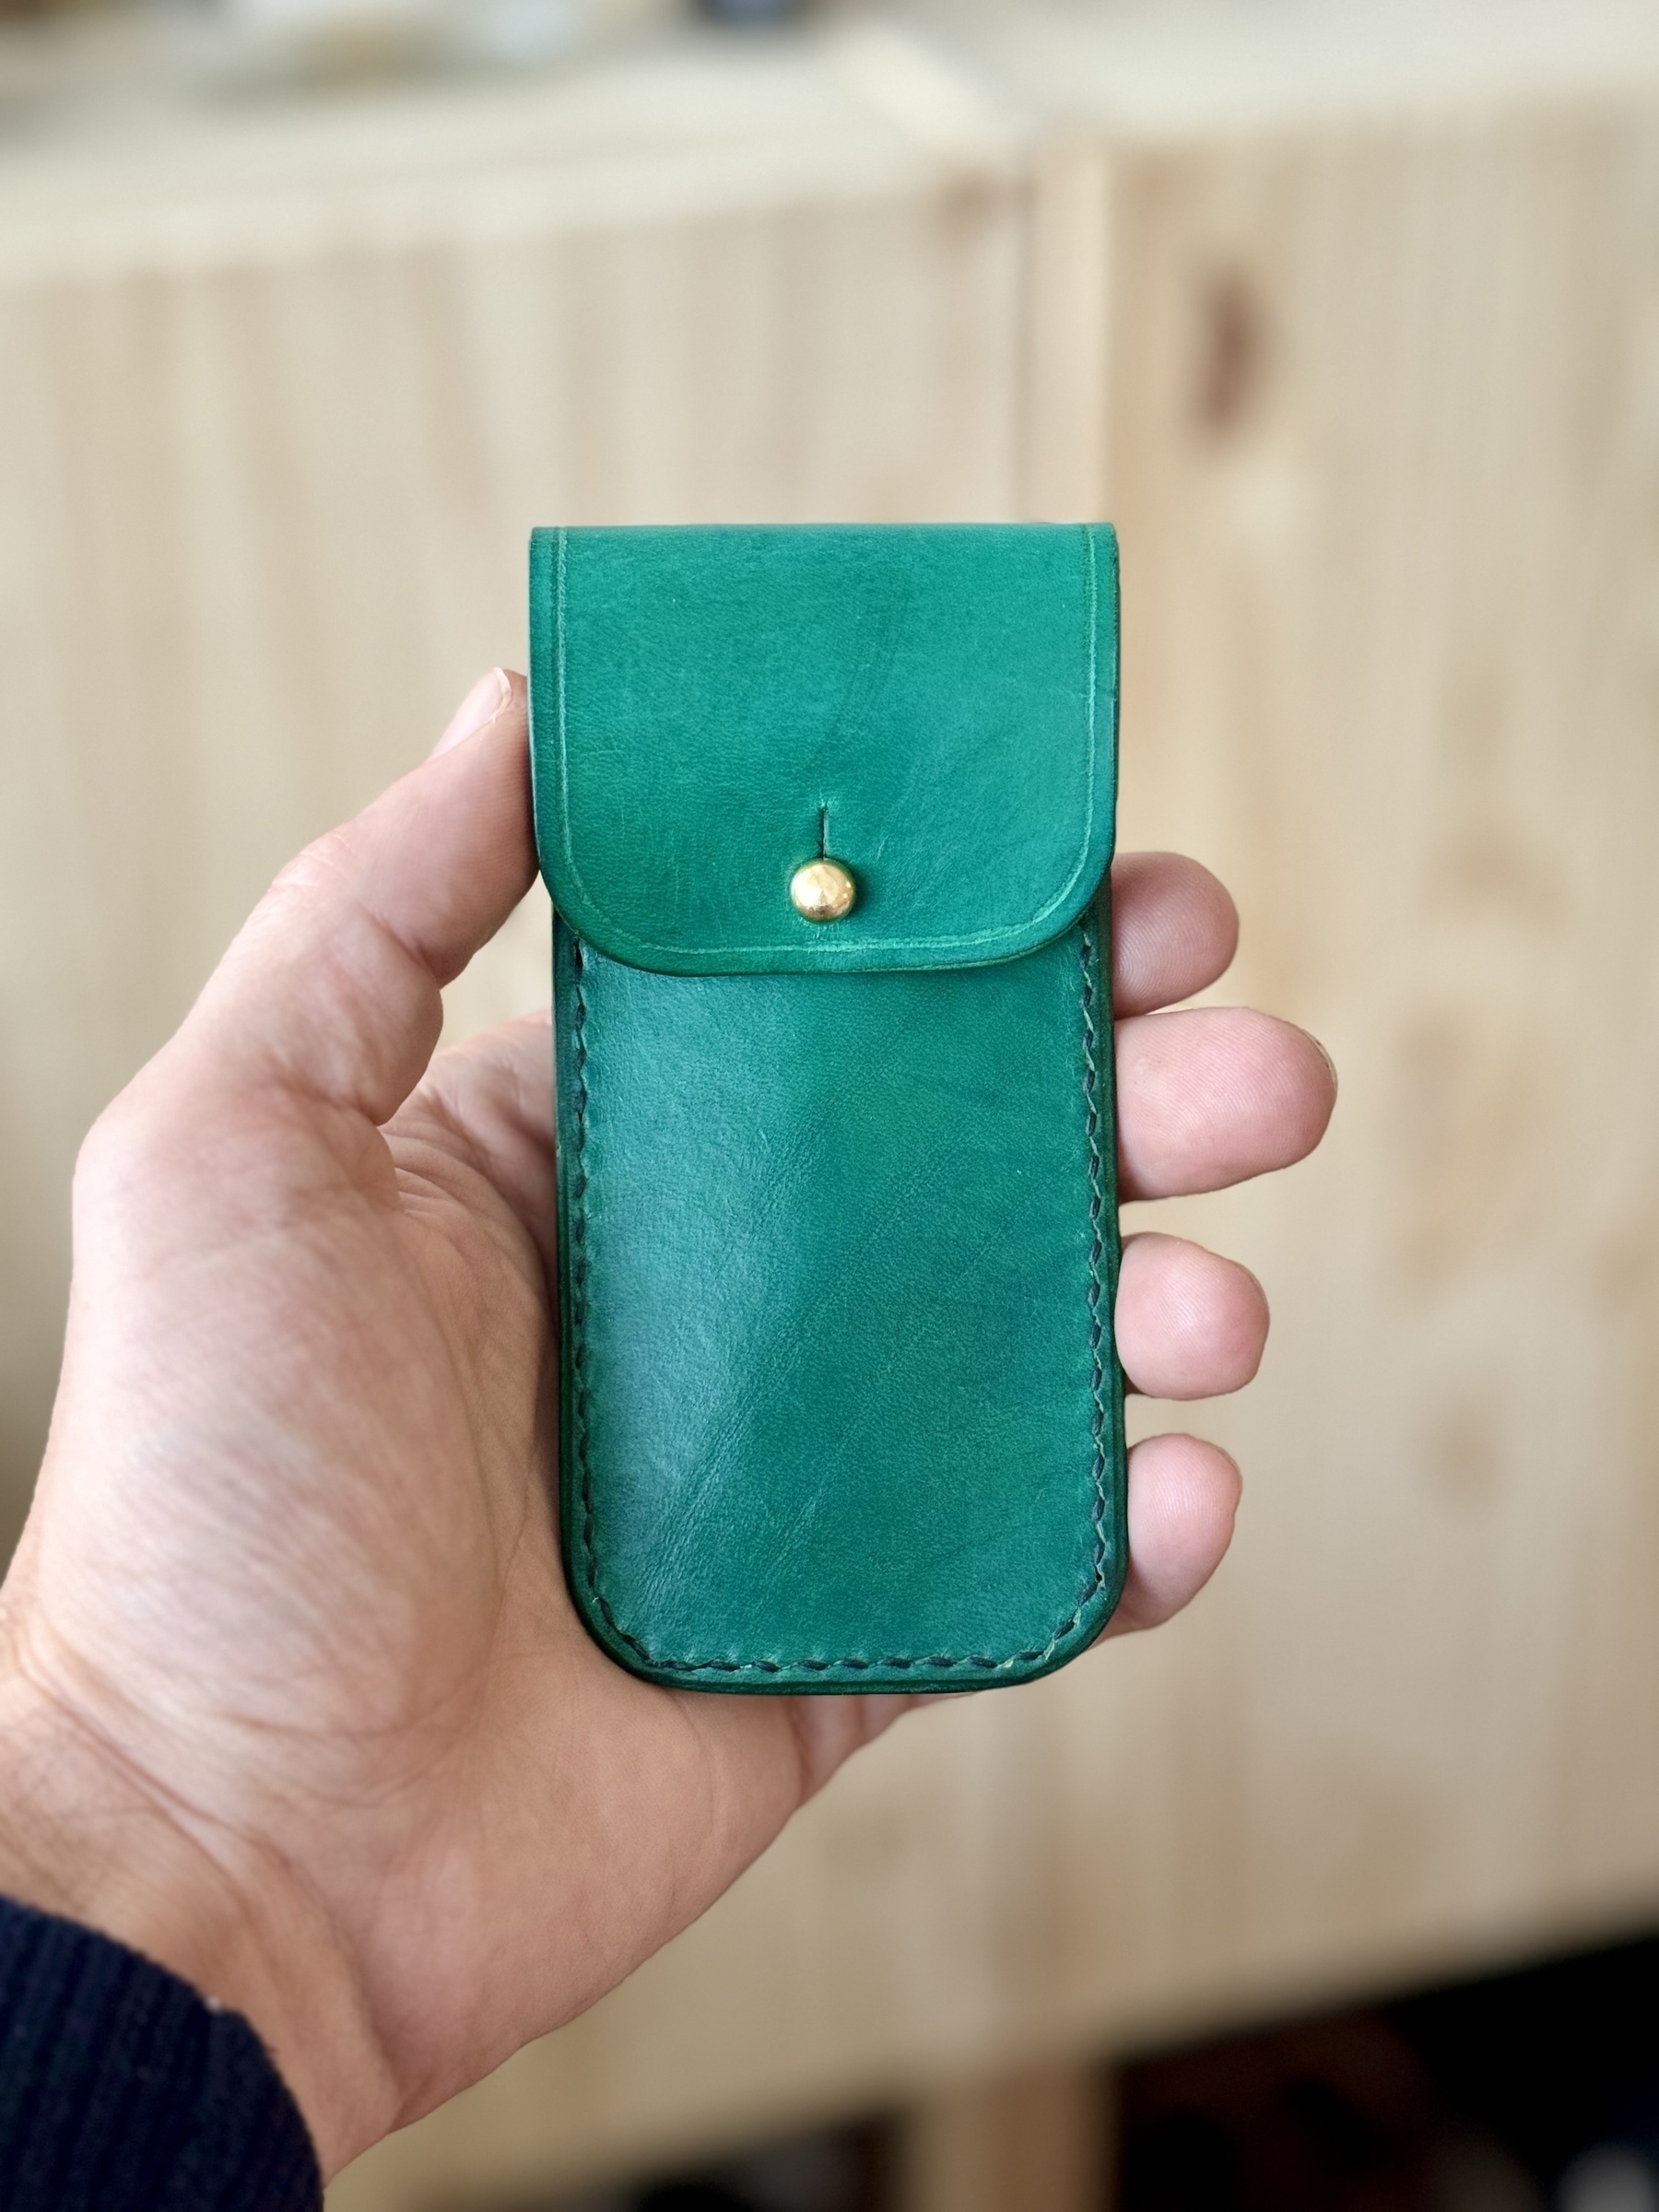 Lovely leather match pouch hand-dyed in green. Hand-stitched with black thread. Solid brass button-stud closure.